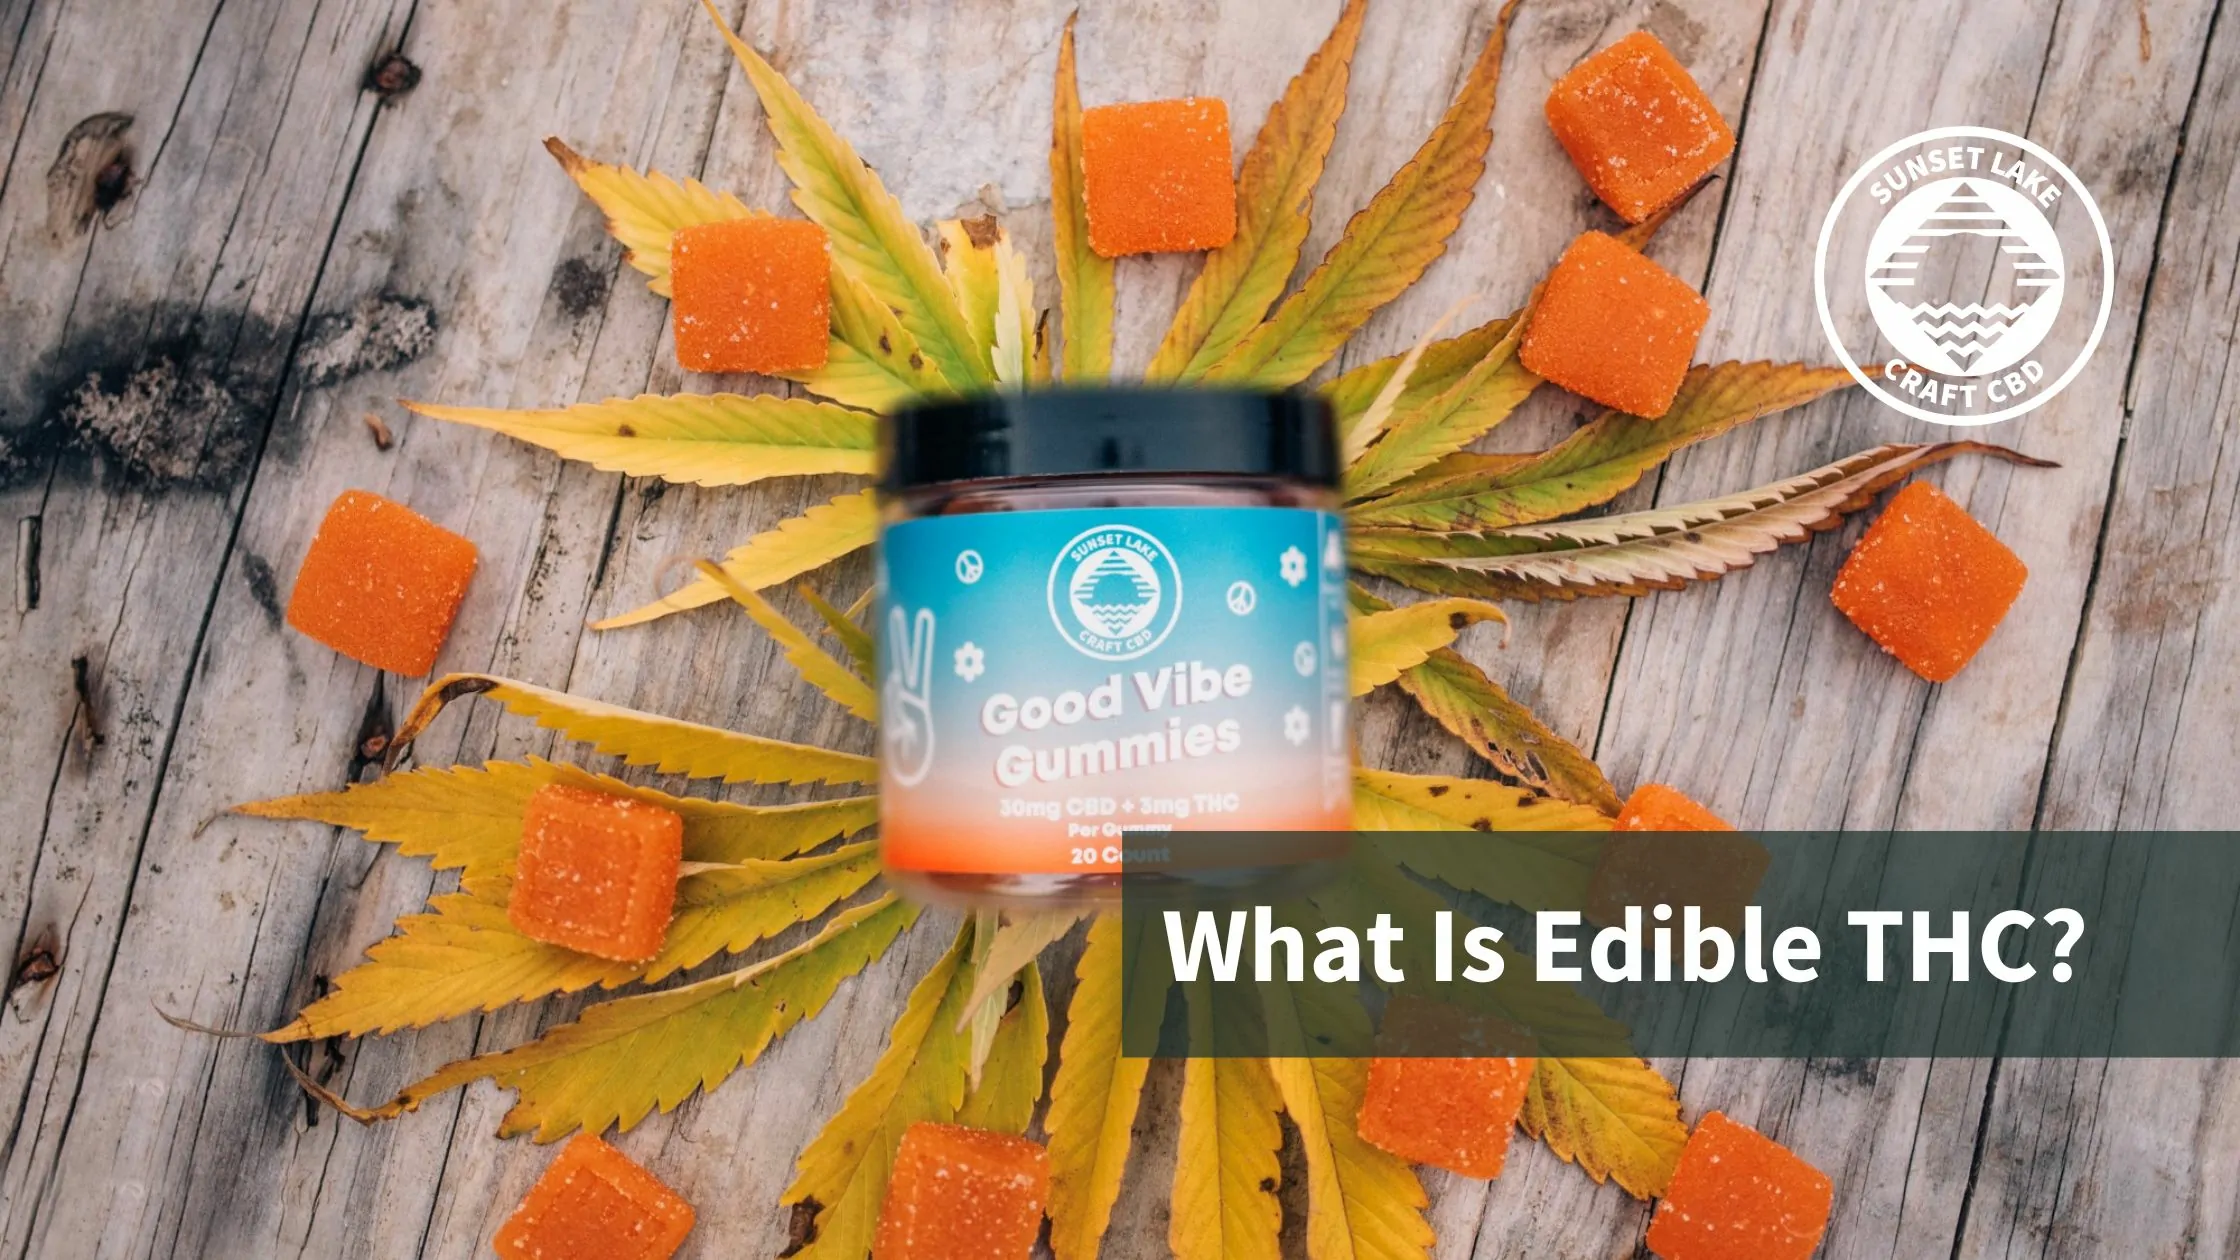 What Is Edible THC? 5 Tips On How To Safely Enjoy Edibles